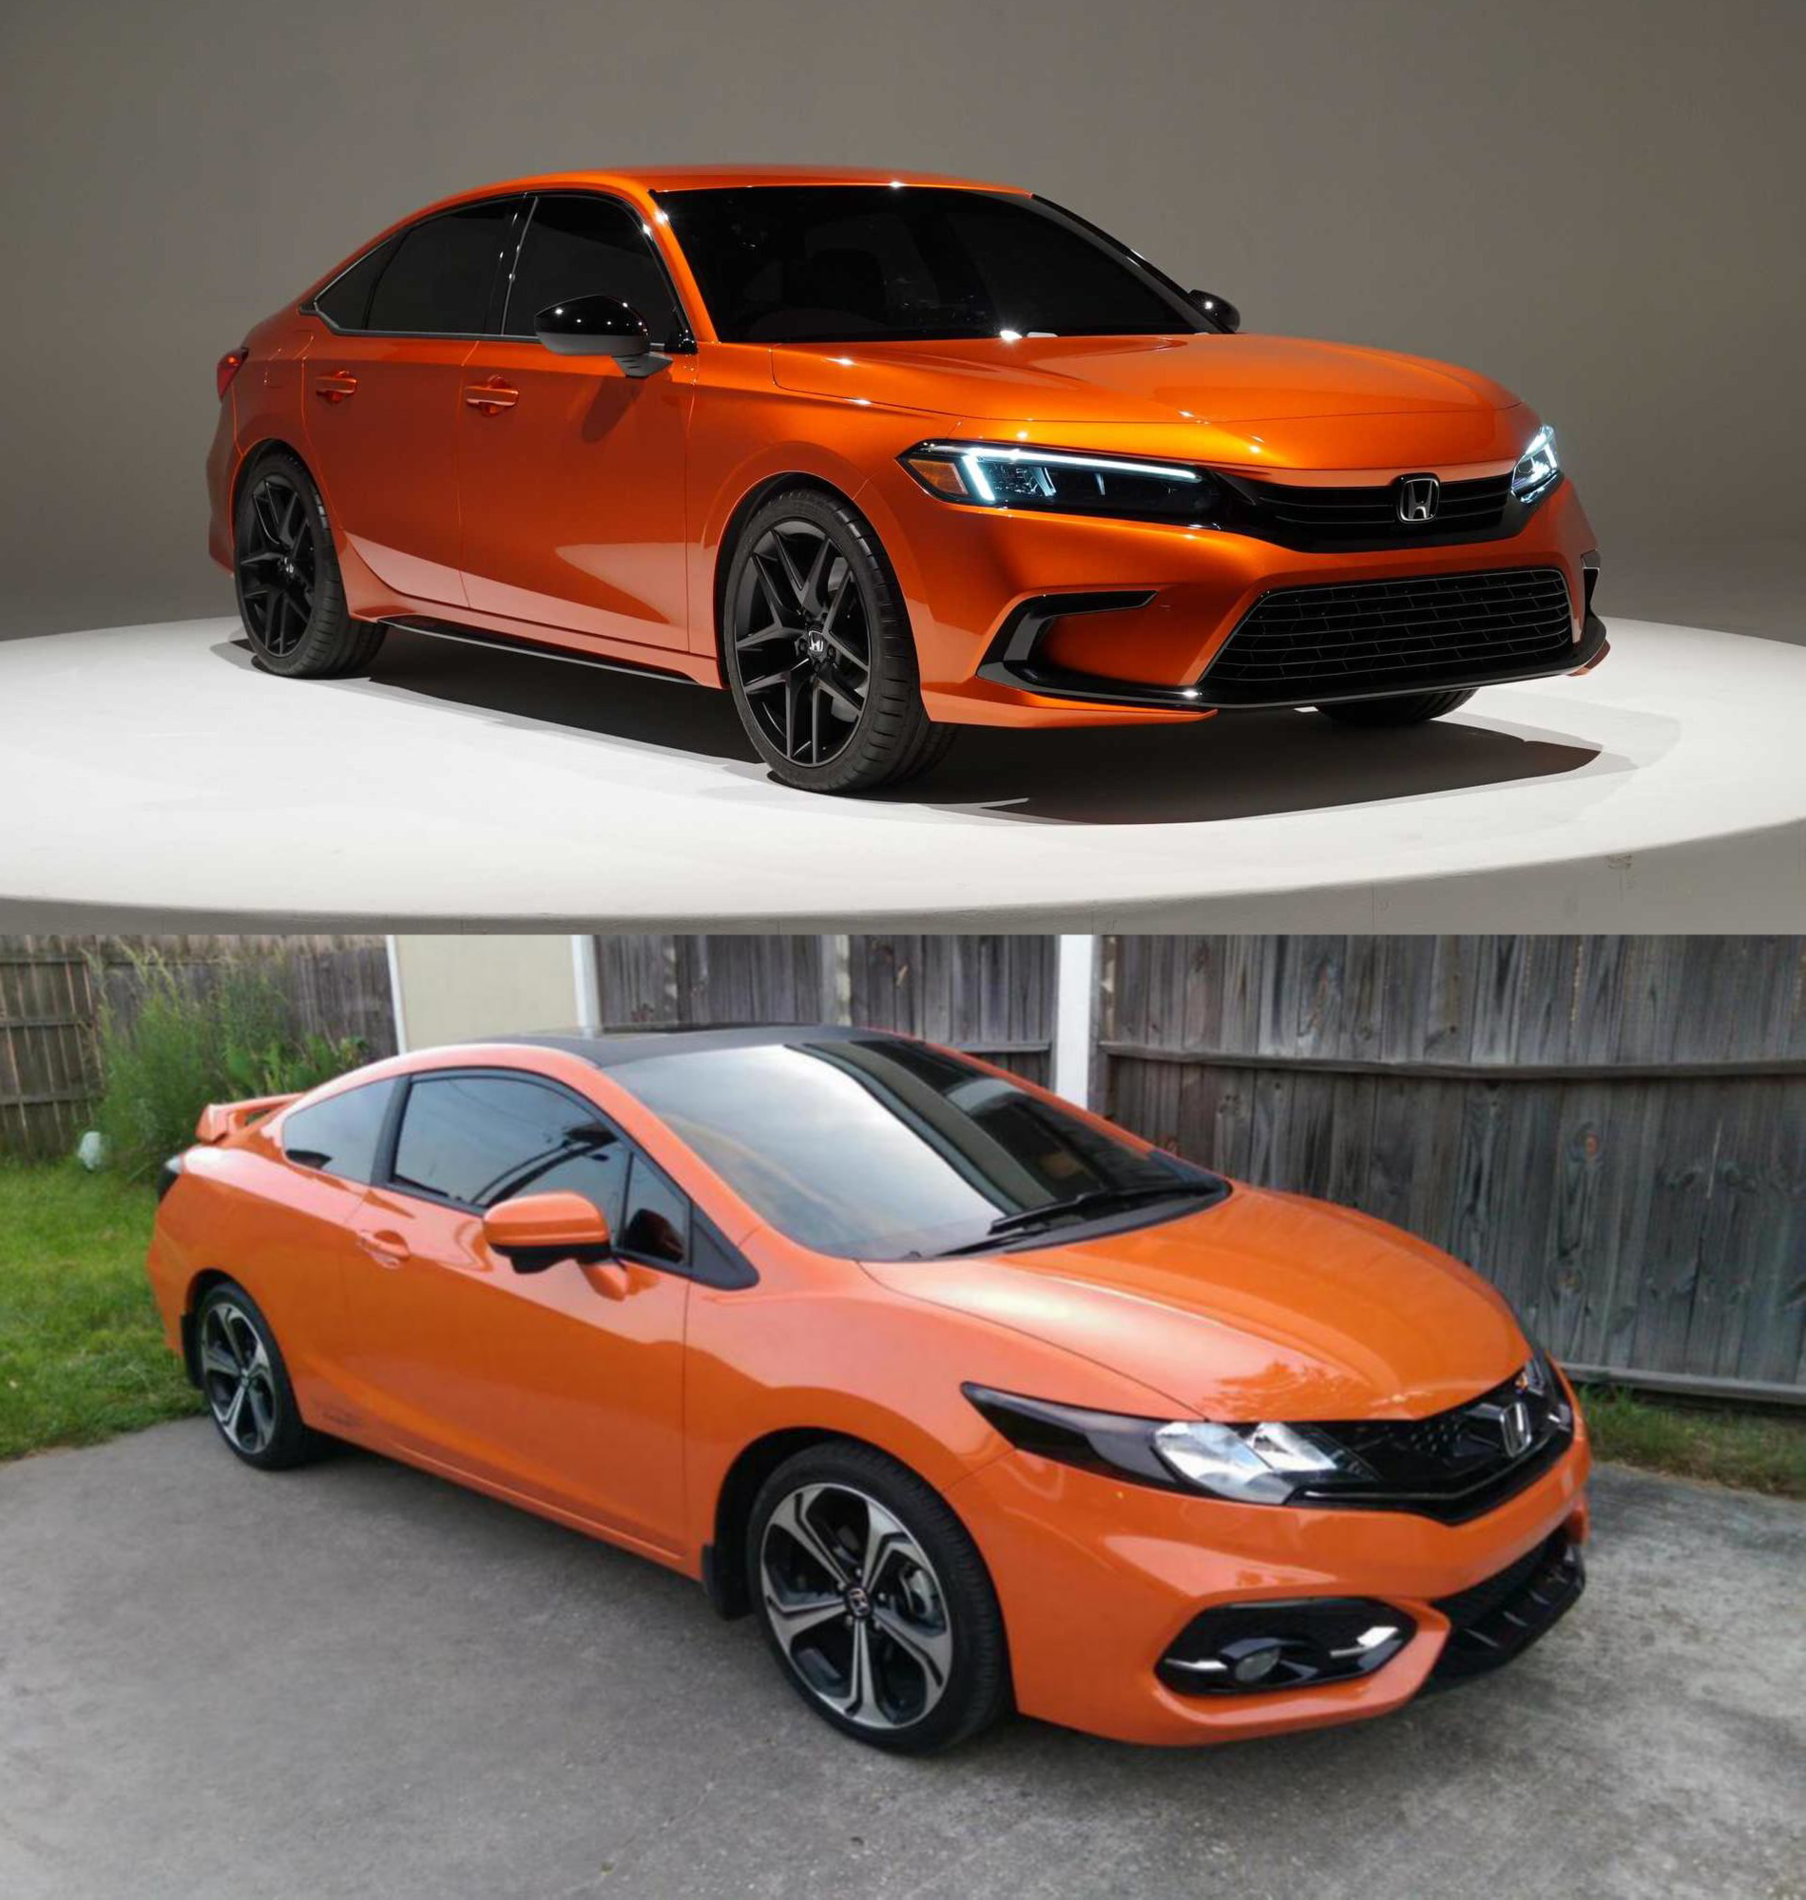 11th Gen Honda Civic Leaked: 2022 Civic Si Chassis Code = FE1 + Paint Colors (NEW Blazing Orange Pearl) First Look! orangeVs